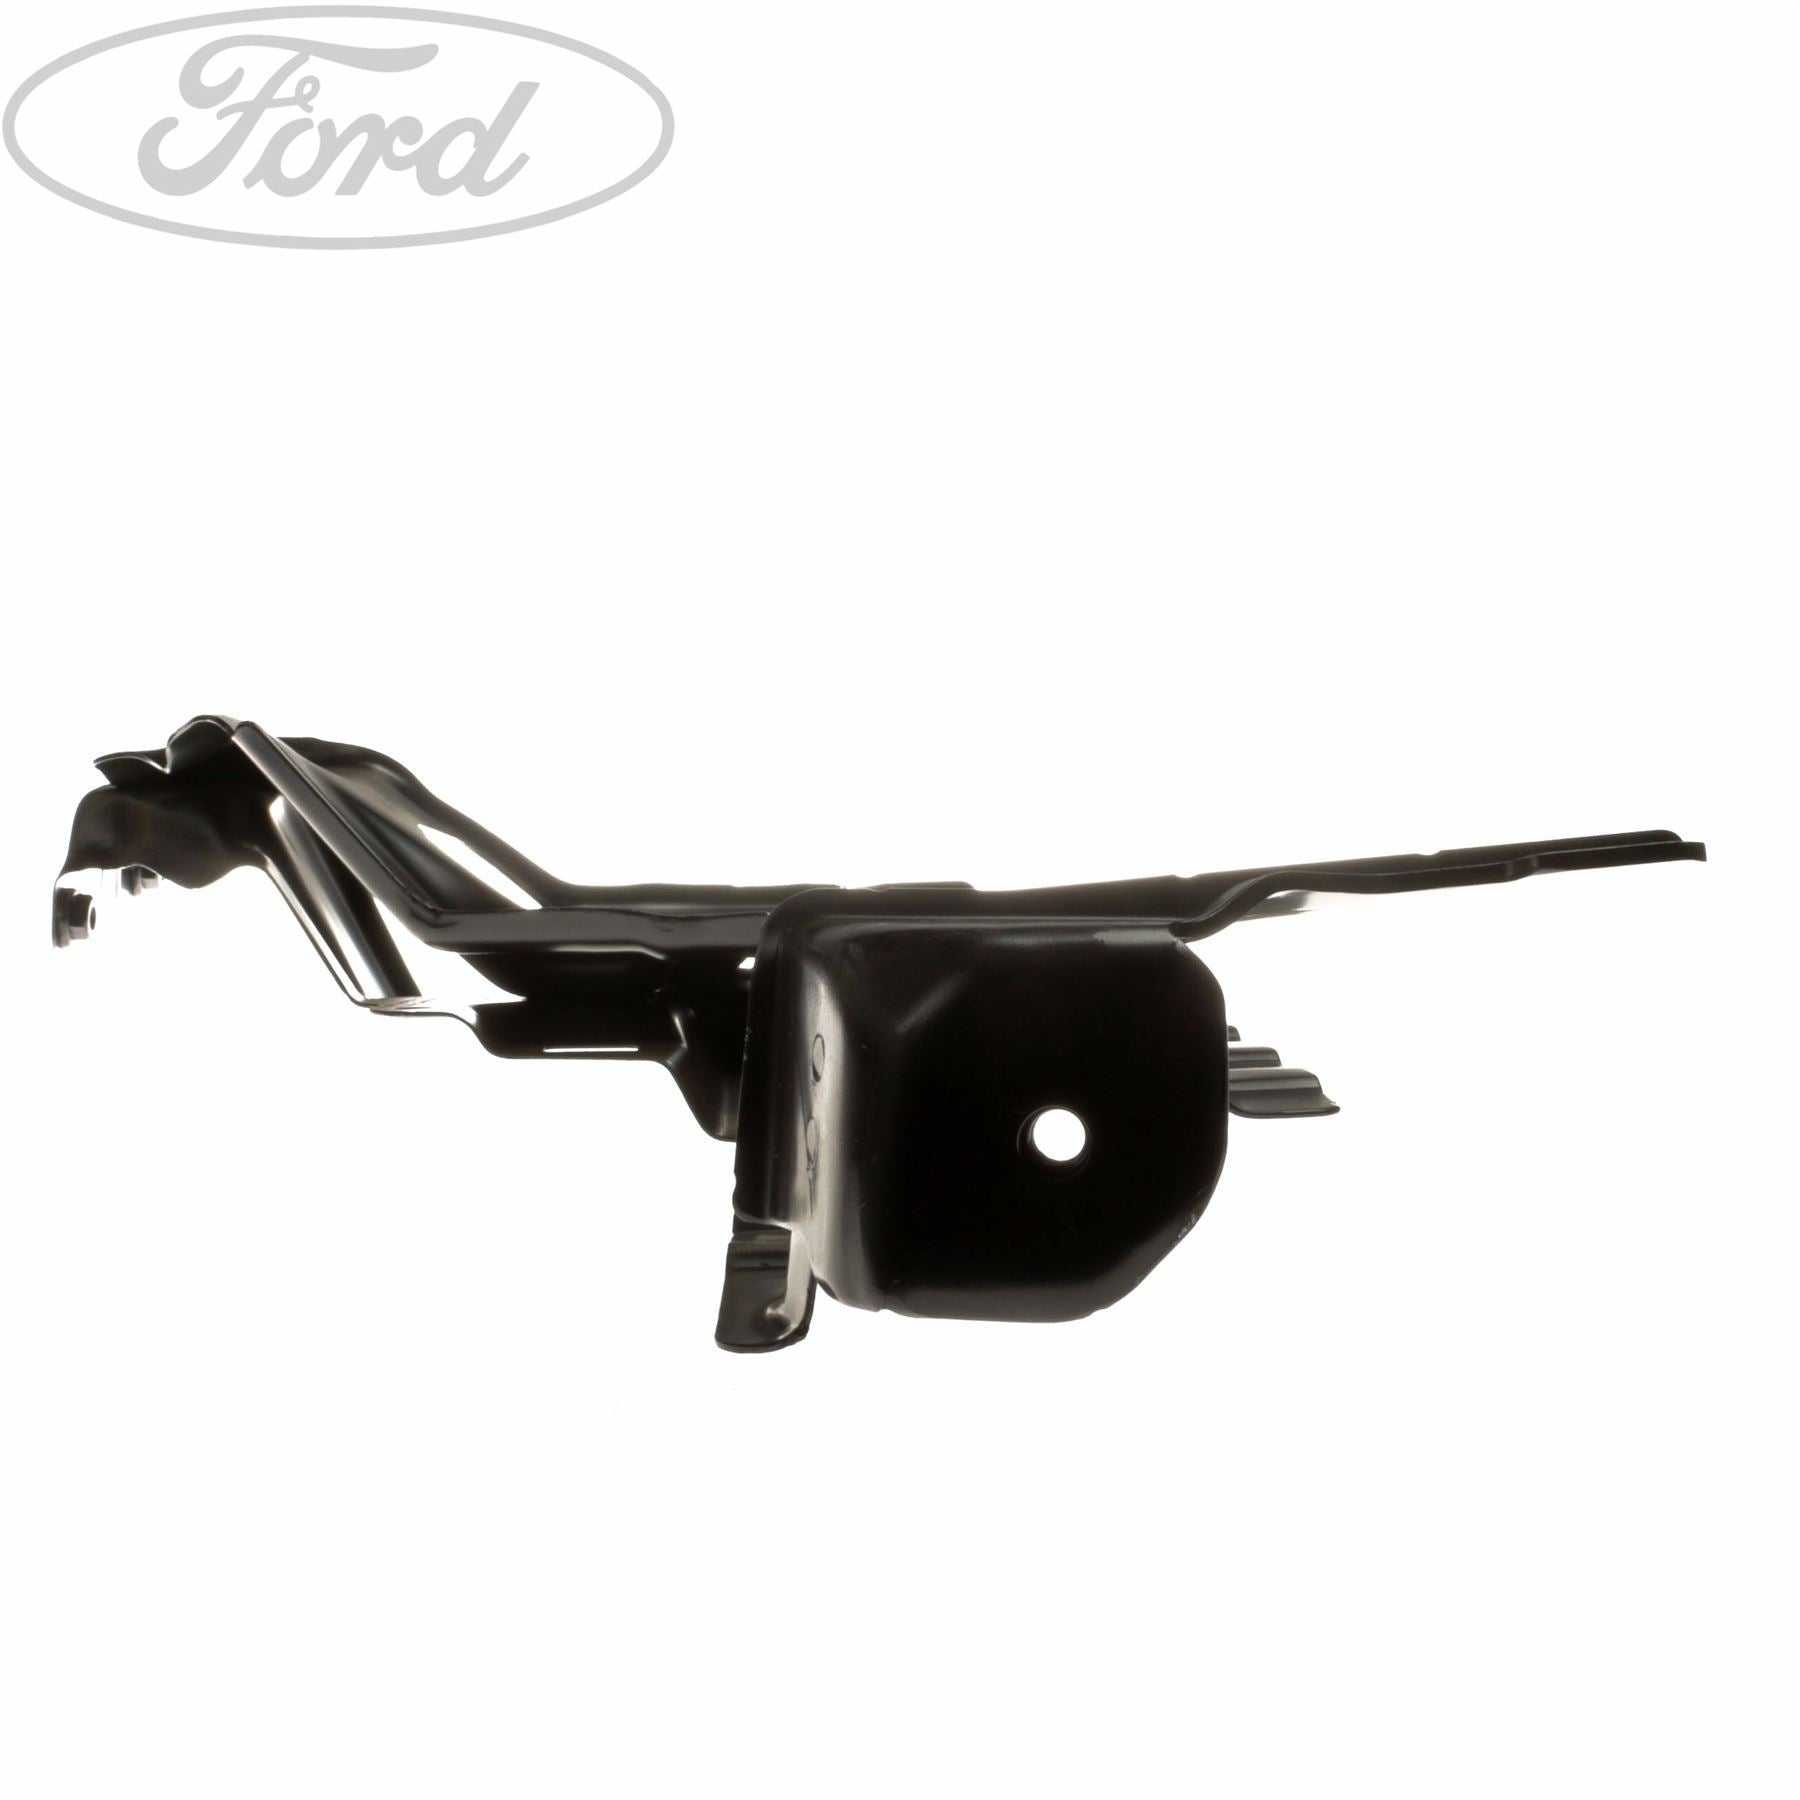 Ford, SIDE PANEL PARTS